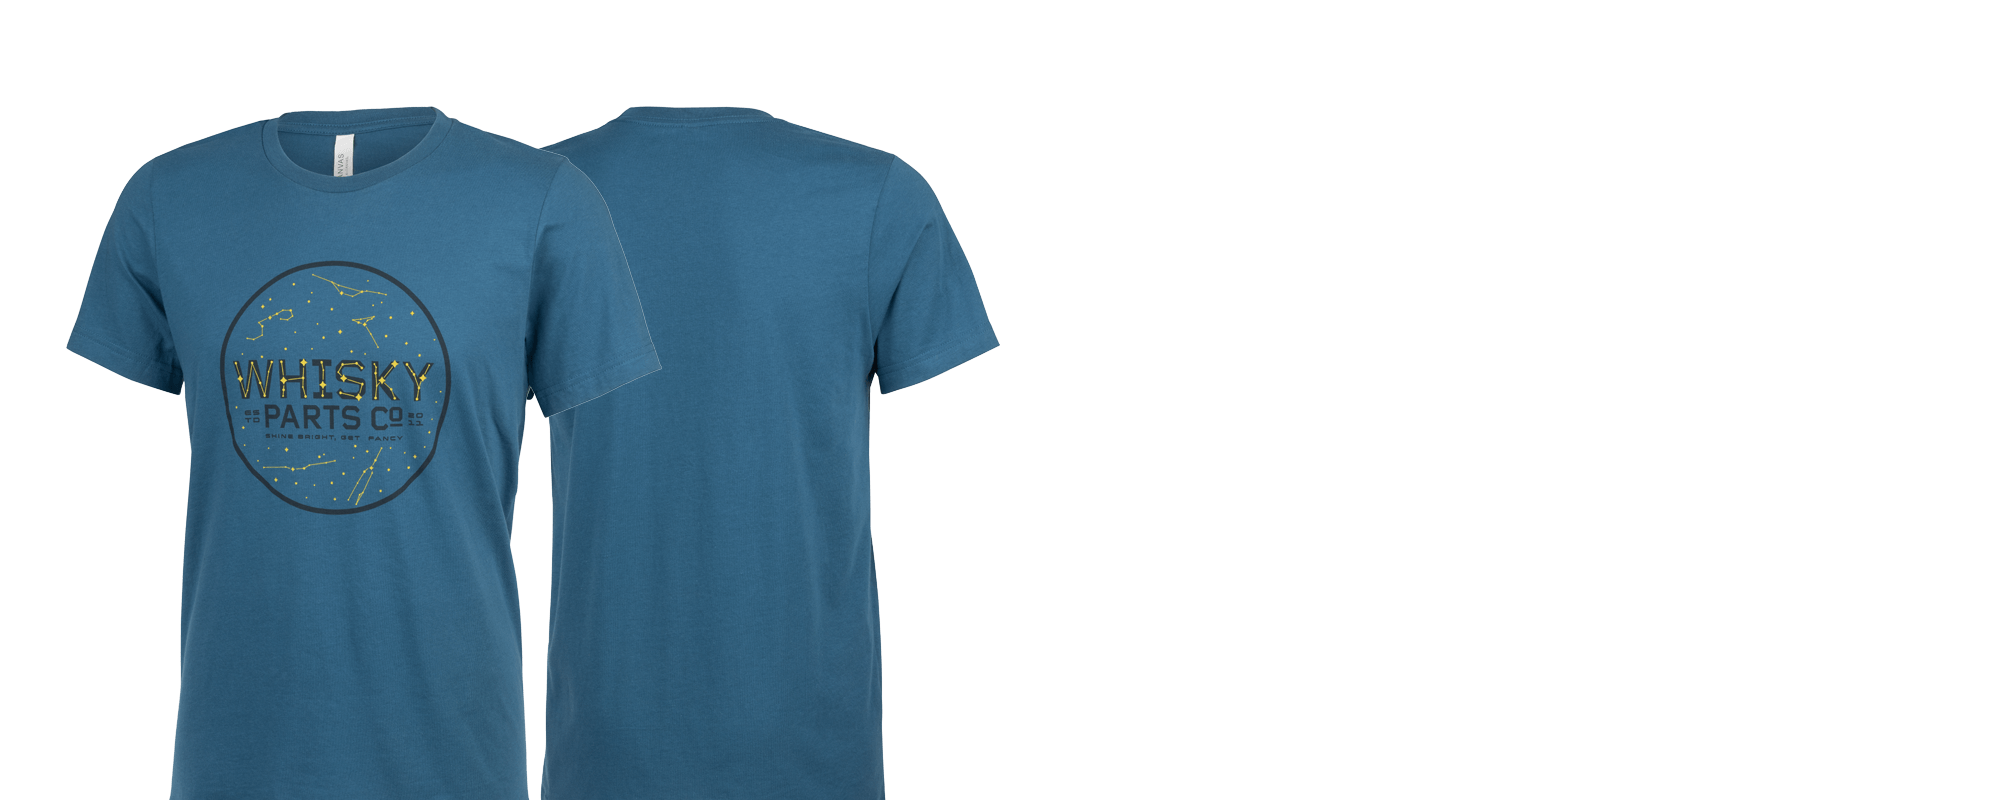 Whisky Stargazer T-Shirt - Deep Teal - Front and Back shown